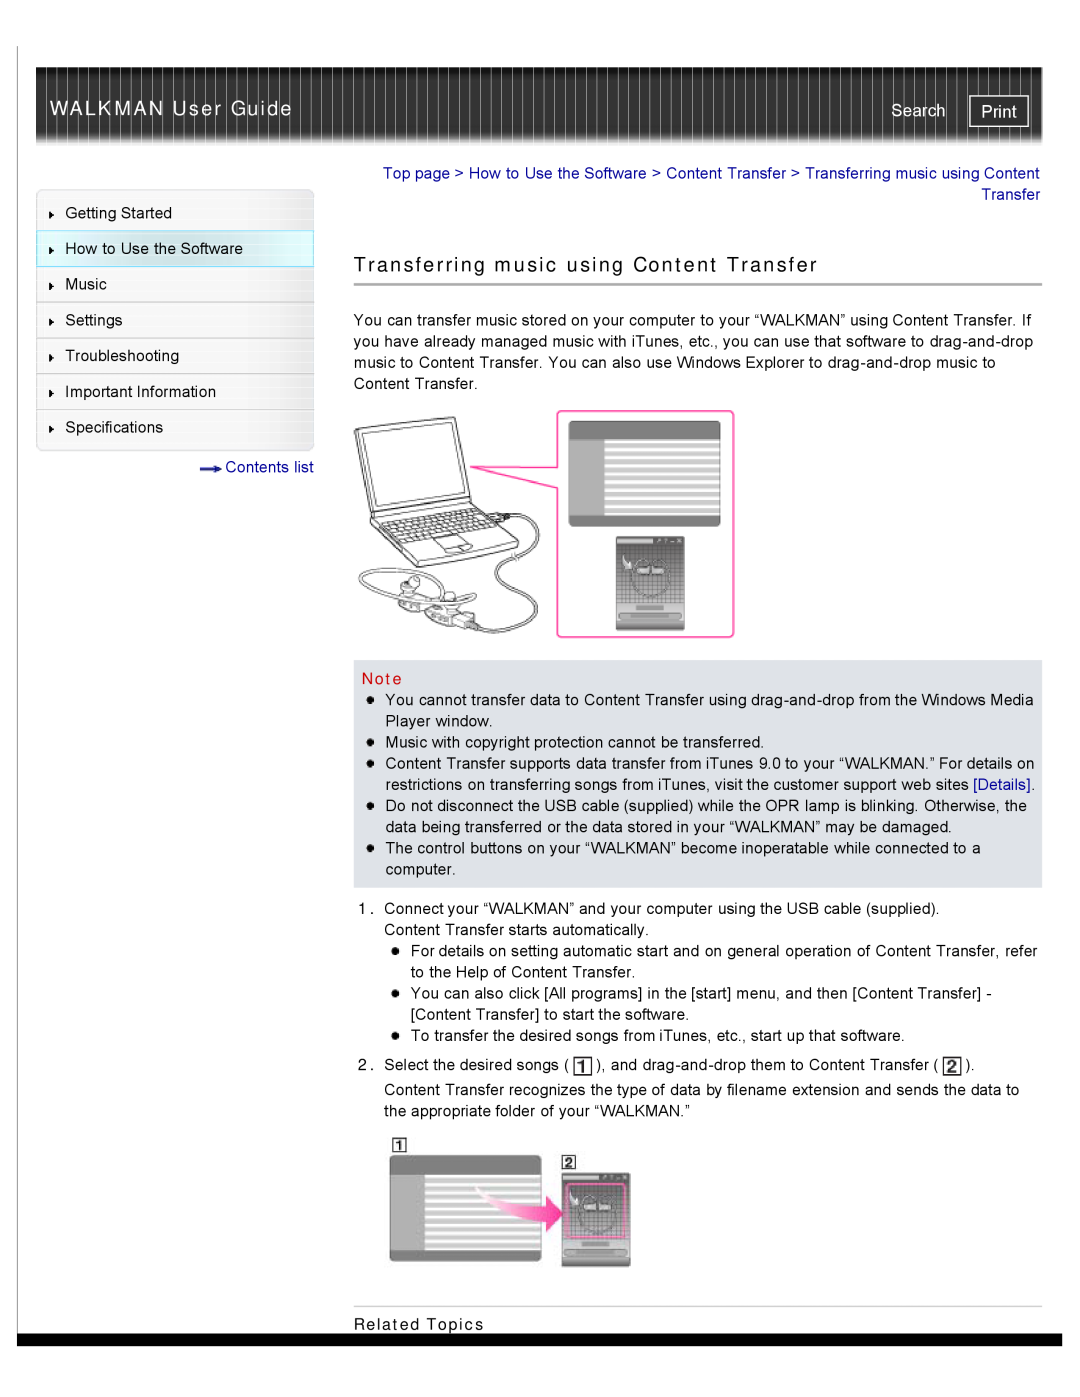 Sony NWZ-W262, NWZ-W263 Transferring music using Content Transfer, WALKMAN User Guide, Search, Print, Contents list 